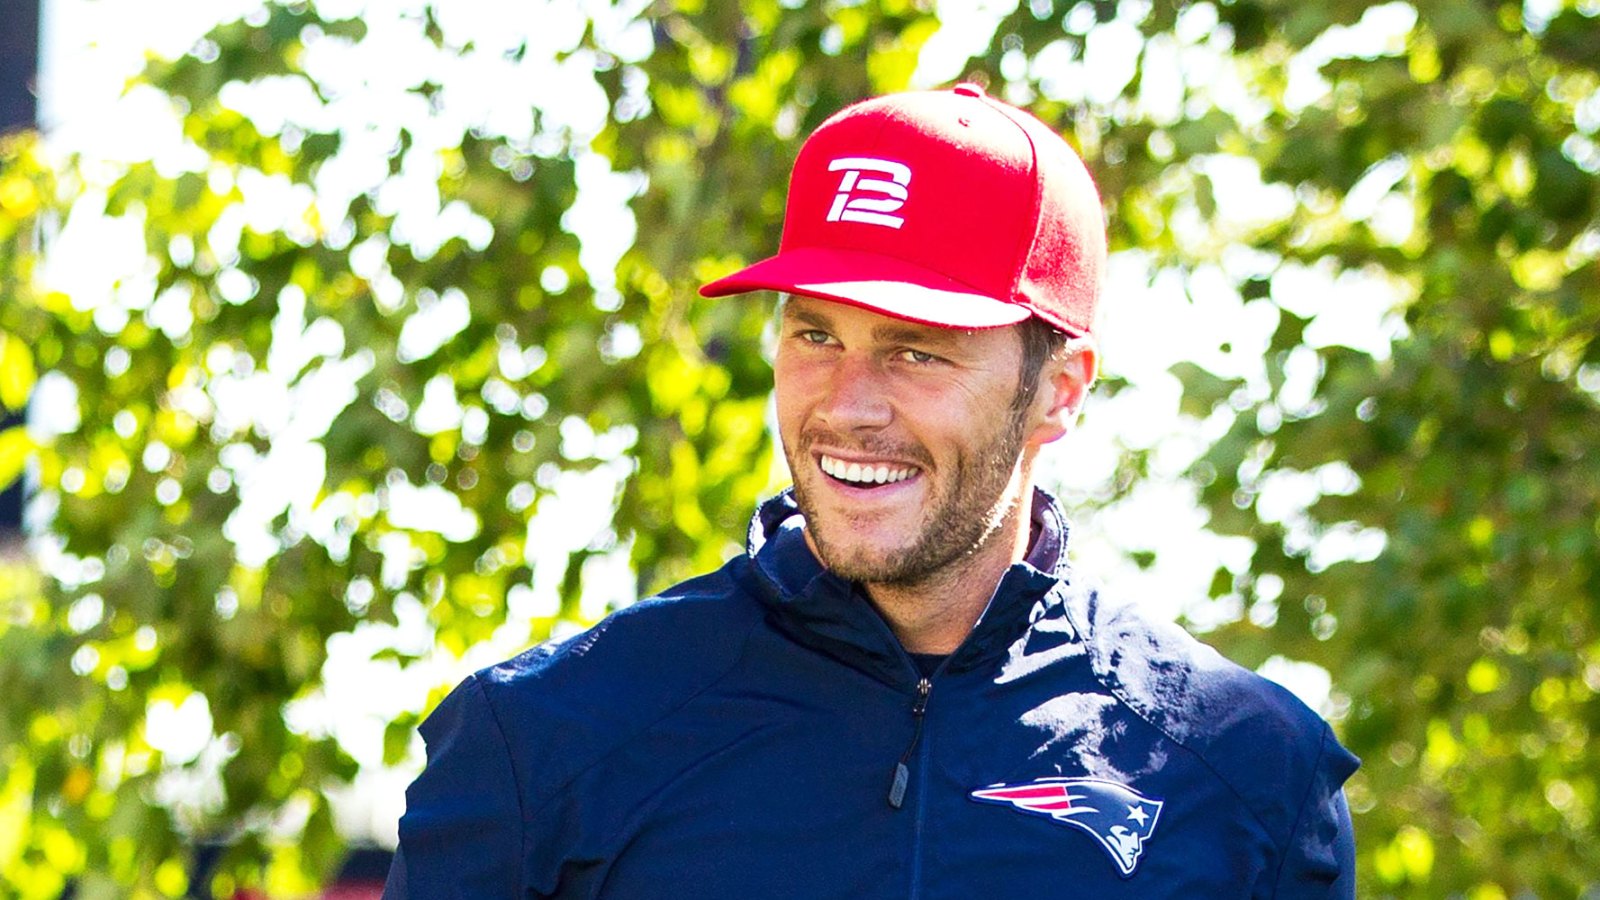 Tom-Brady-Says-Hes-Never-Had-Coffee-and-Everyones-Freaking-Out-Read-the-Reactions-Tom-Brady-2016